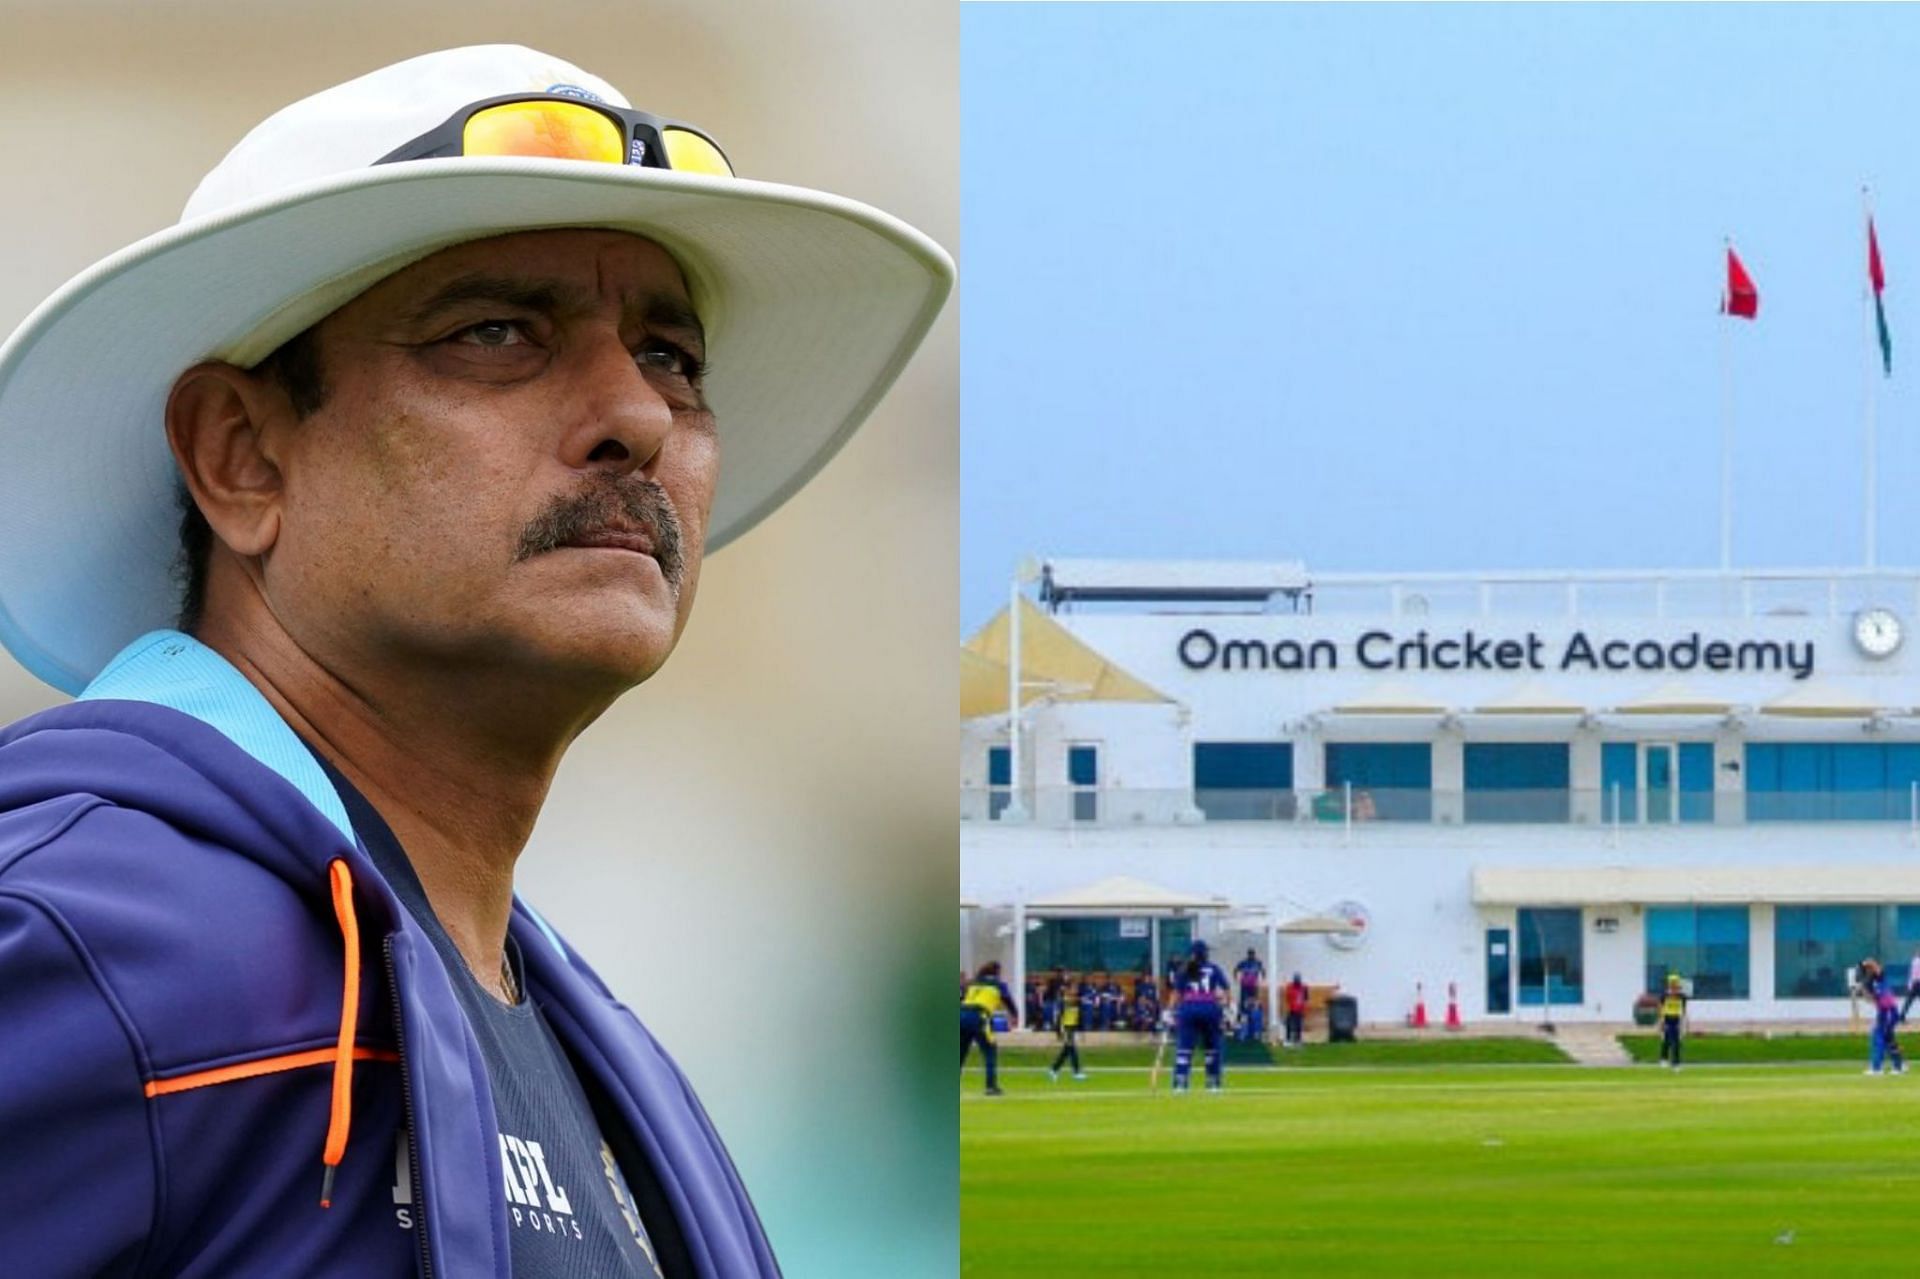 Ravi Shastri has joined Legends League Cricket as commissioner